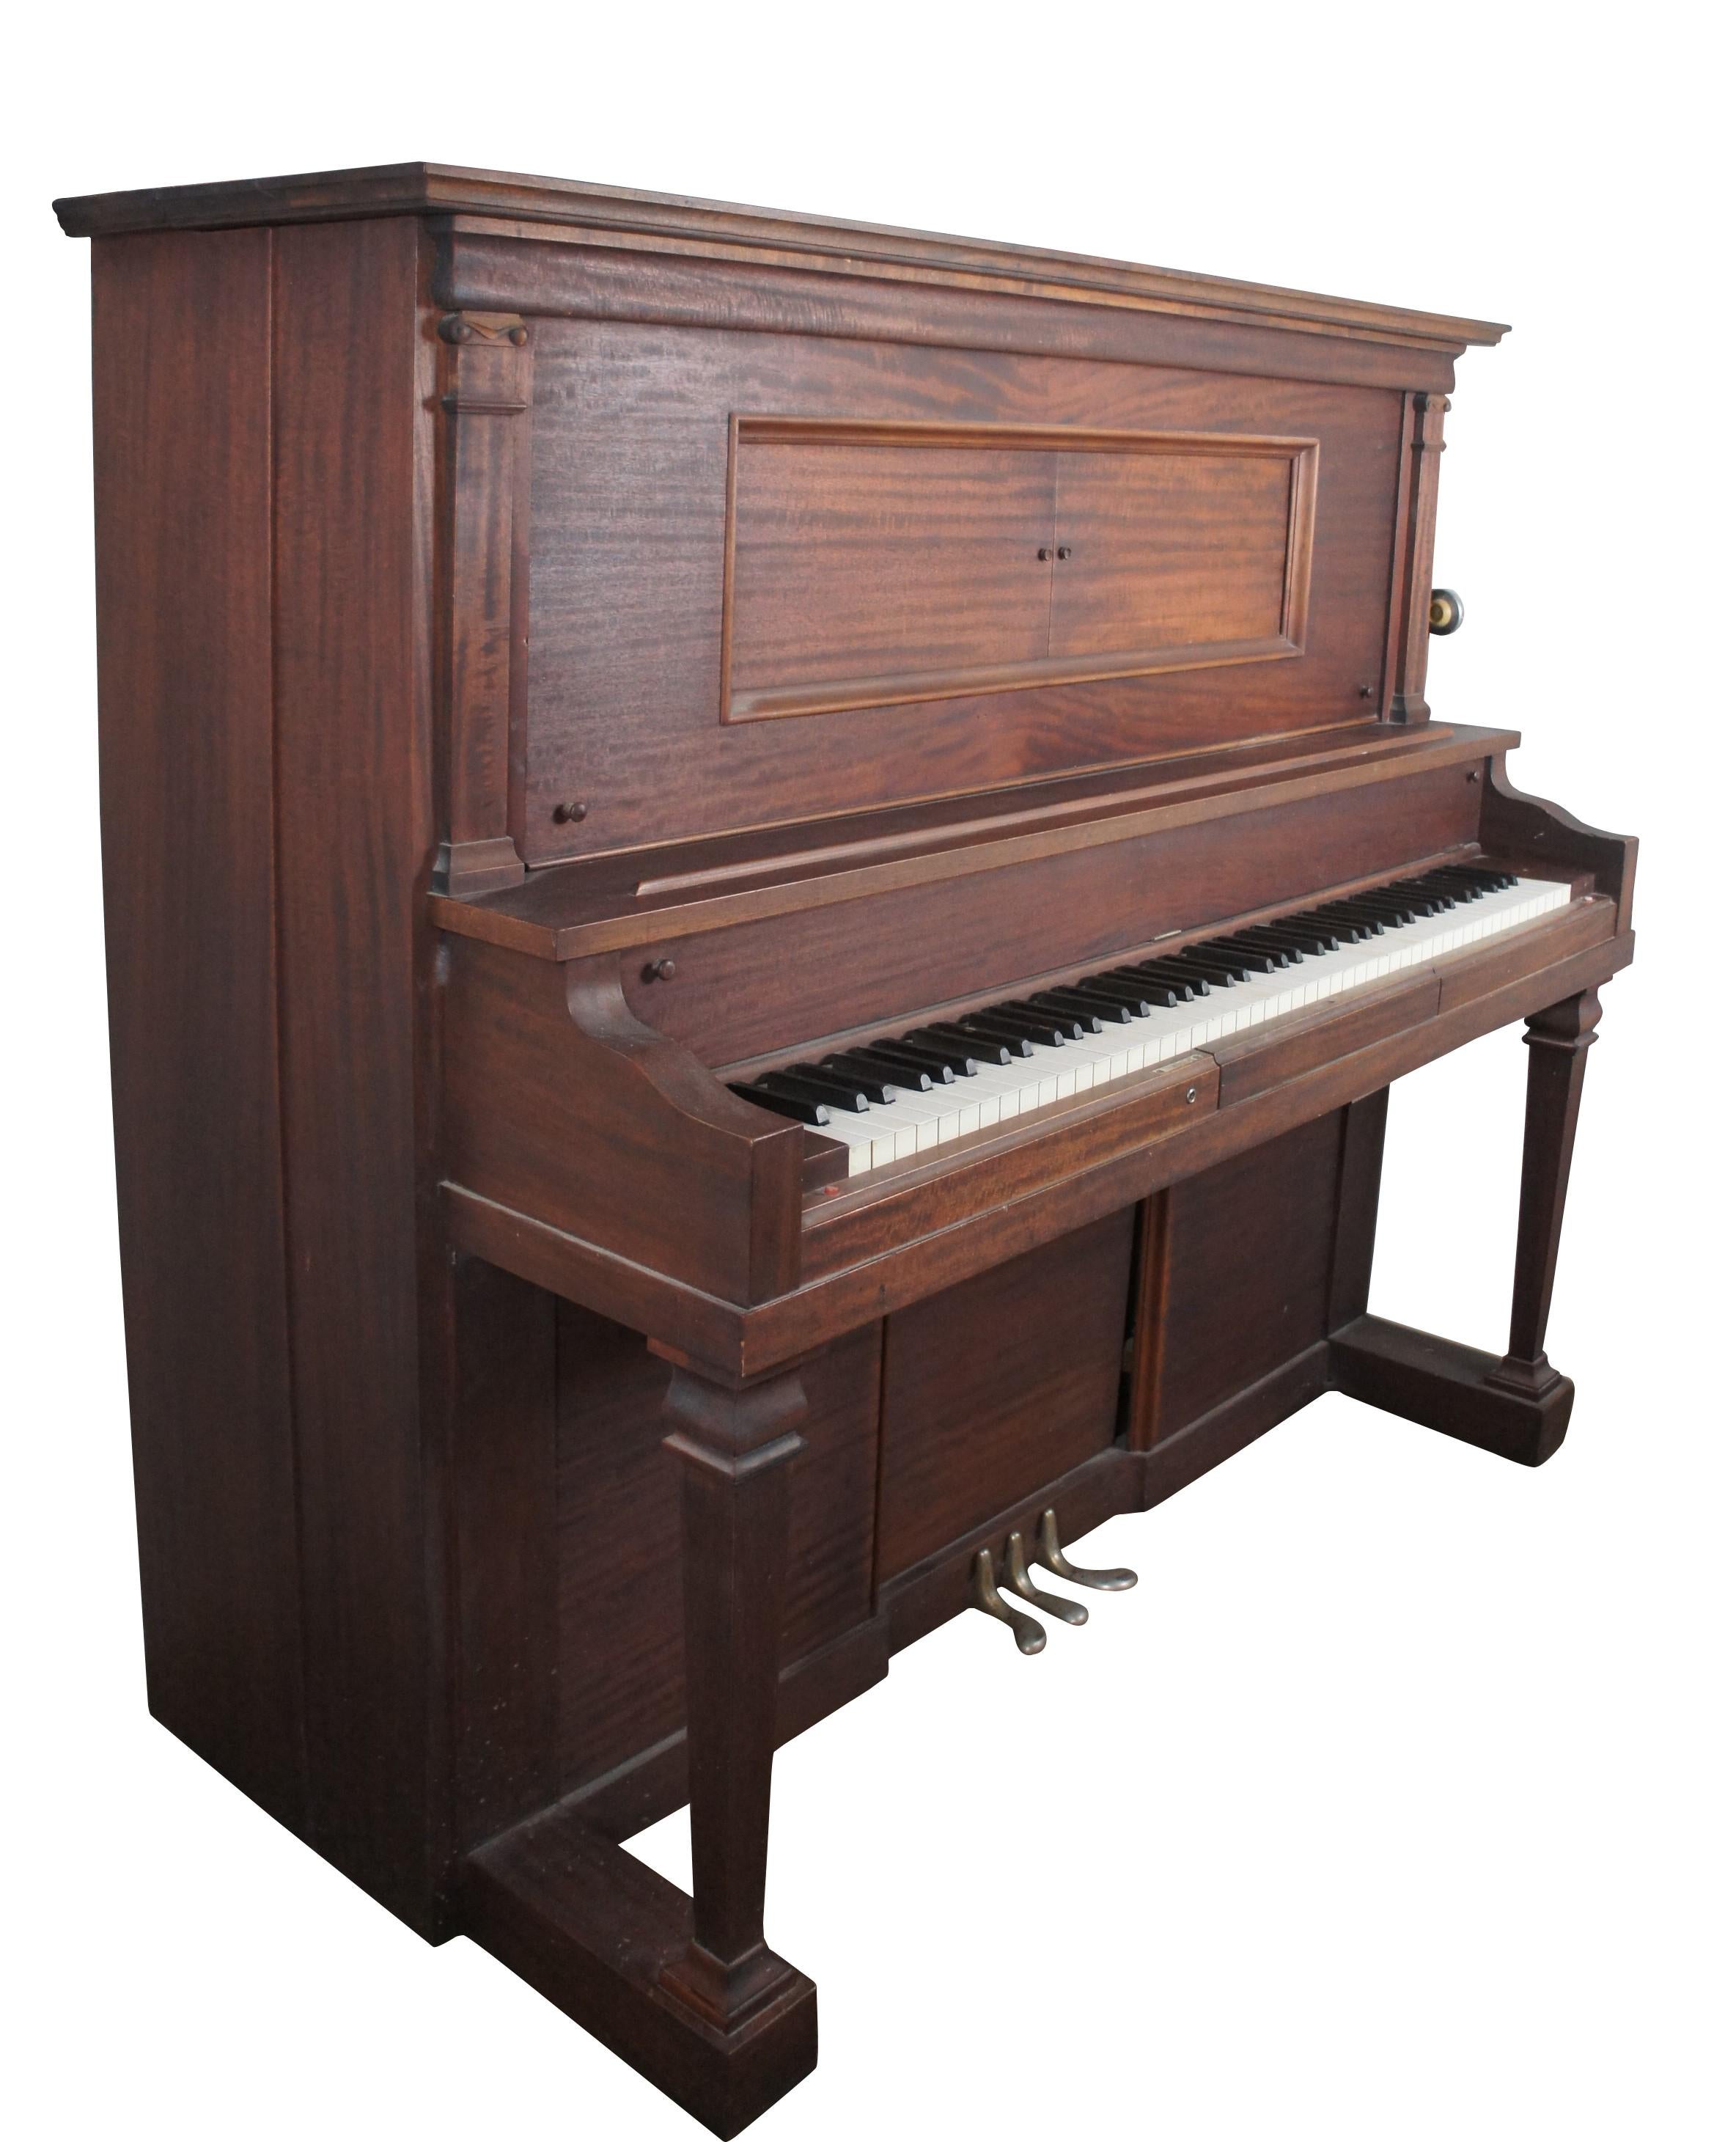 Antique Victorian player piano by The Cable Company of Chicago which features a Carolina Inner-player.  Circa 1915.

Includes:  I Love Paris and Oh Lady Be Good by Max Kortlander, Hey There and Mack the Knife by J Lawrence Cook, Cherry Pink & Apple